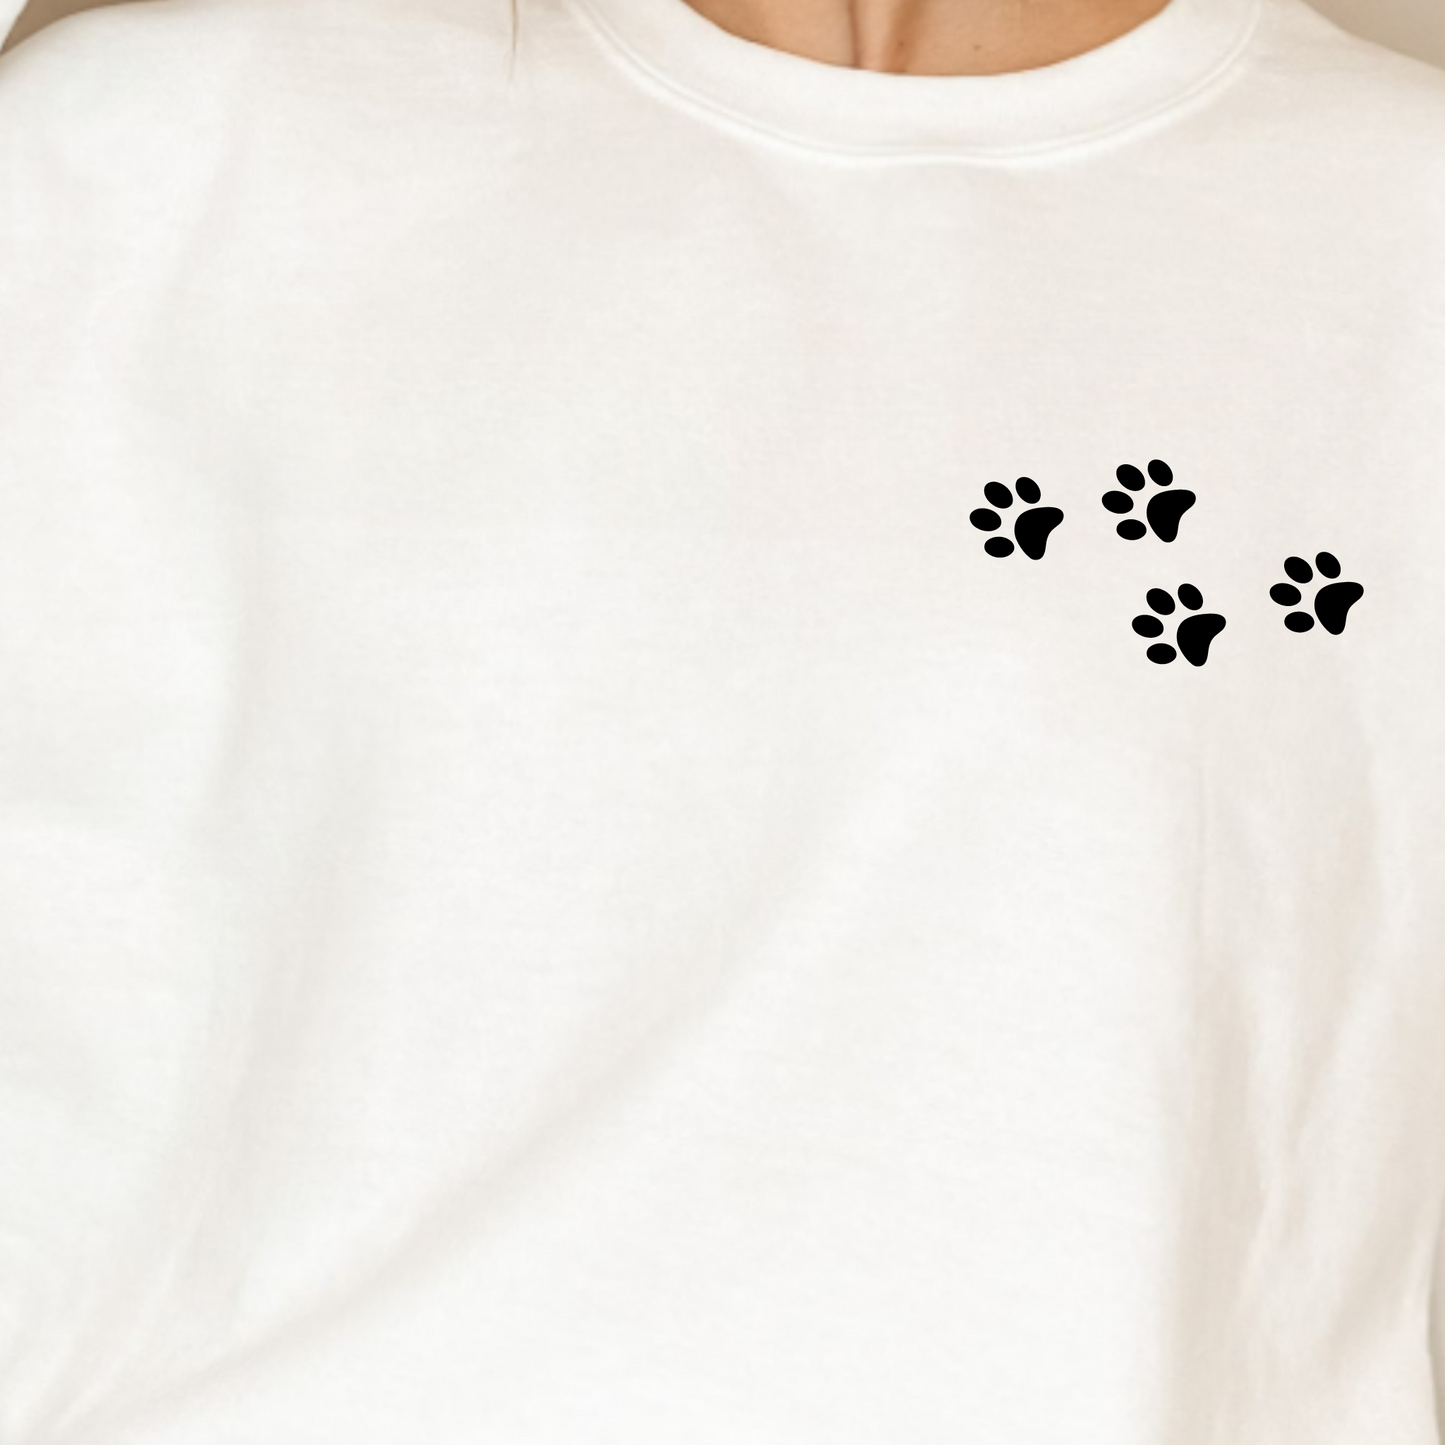 (Shirt not Included)  Dog prints 4" Pocket-  Clear Film Transfer